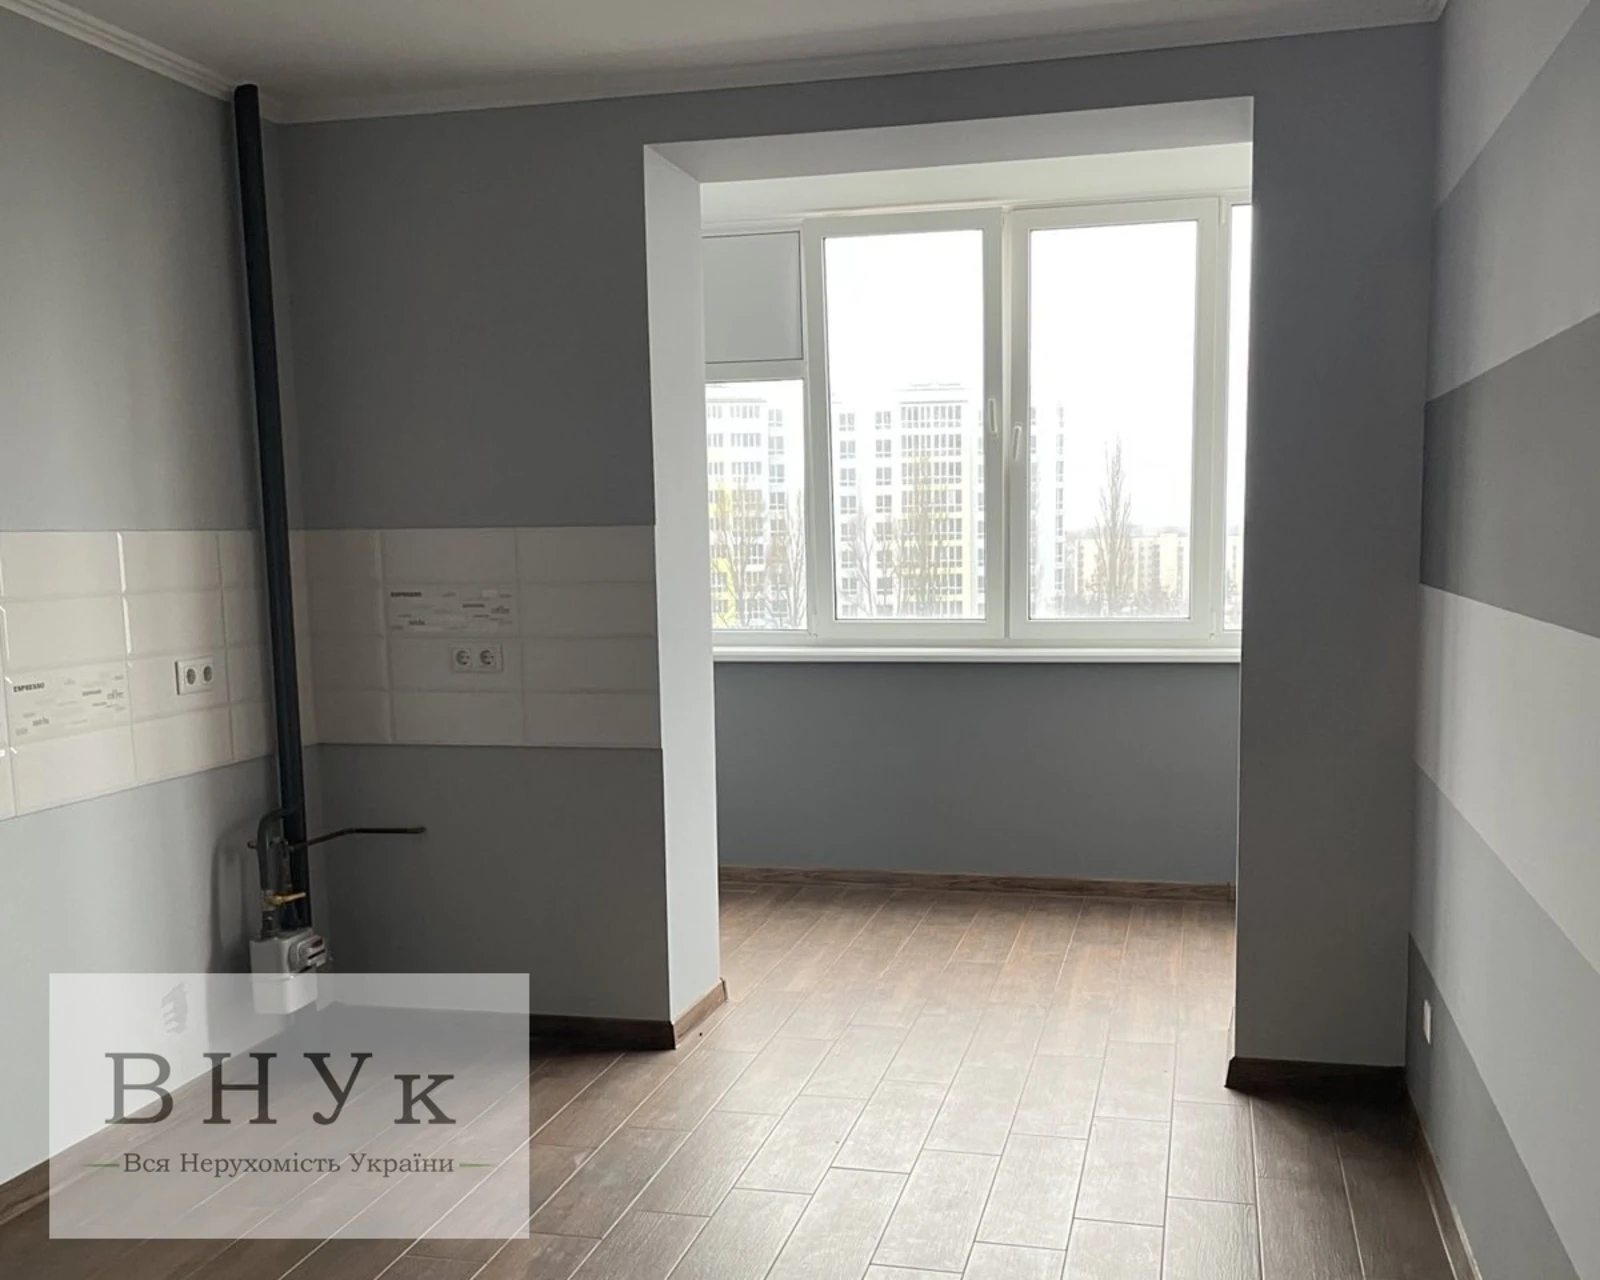 Apartments for sale. 2 rooms, 79 m², 4th floor/11 floors. Budnoho S. , Ternopil. 